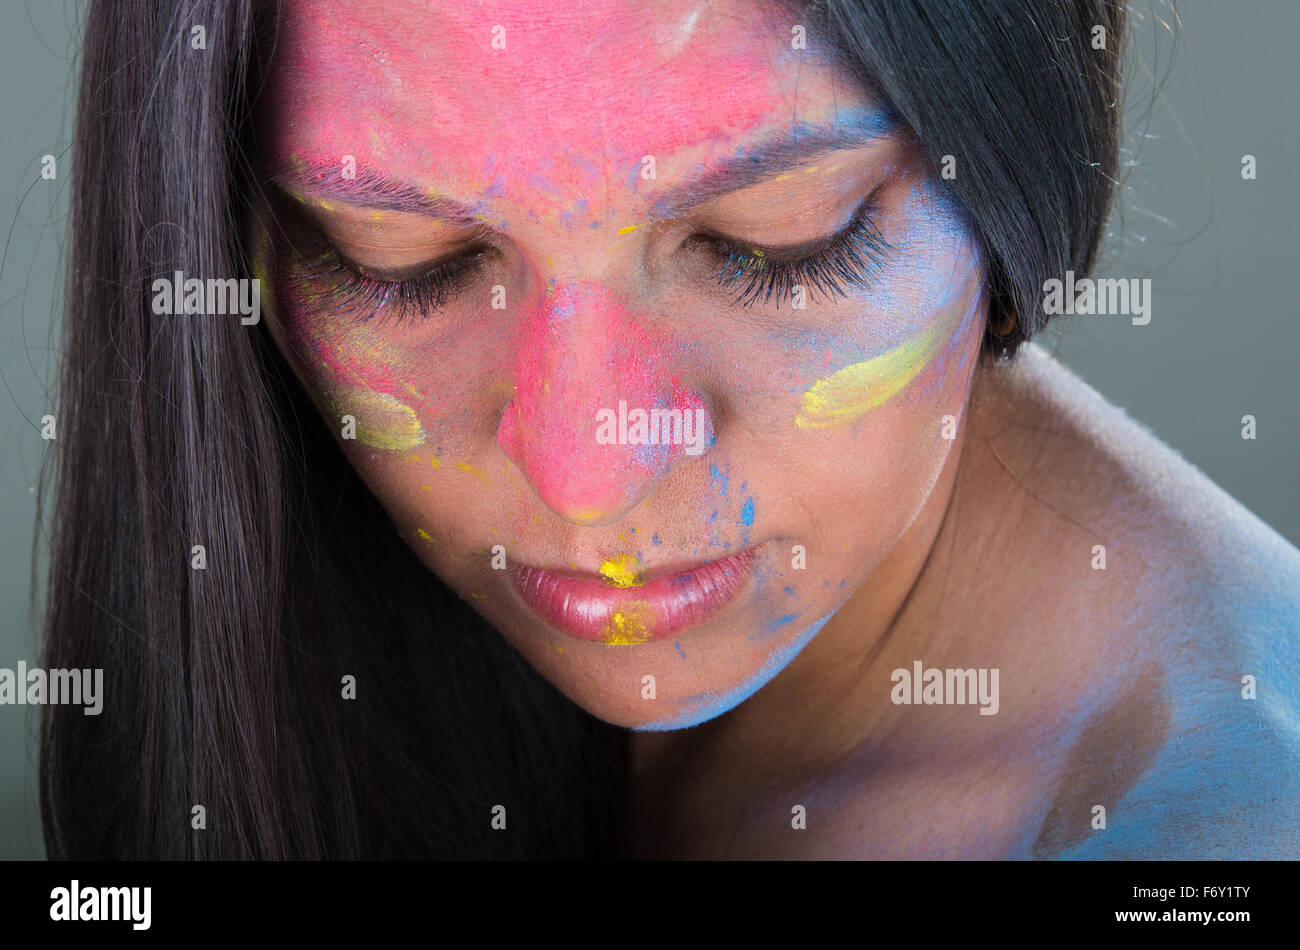 Closeup portrait of latin girl with painted face Stock Photo